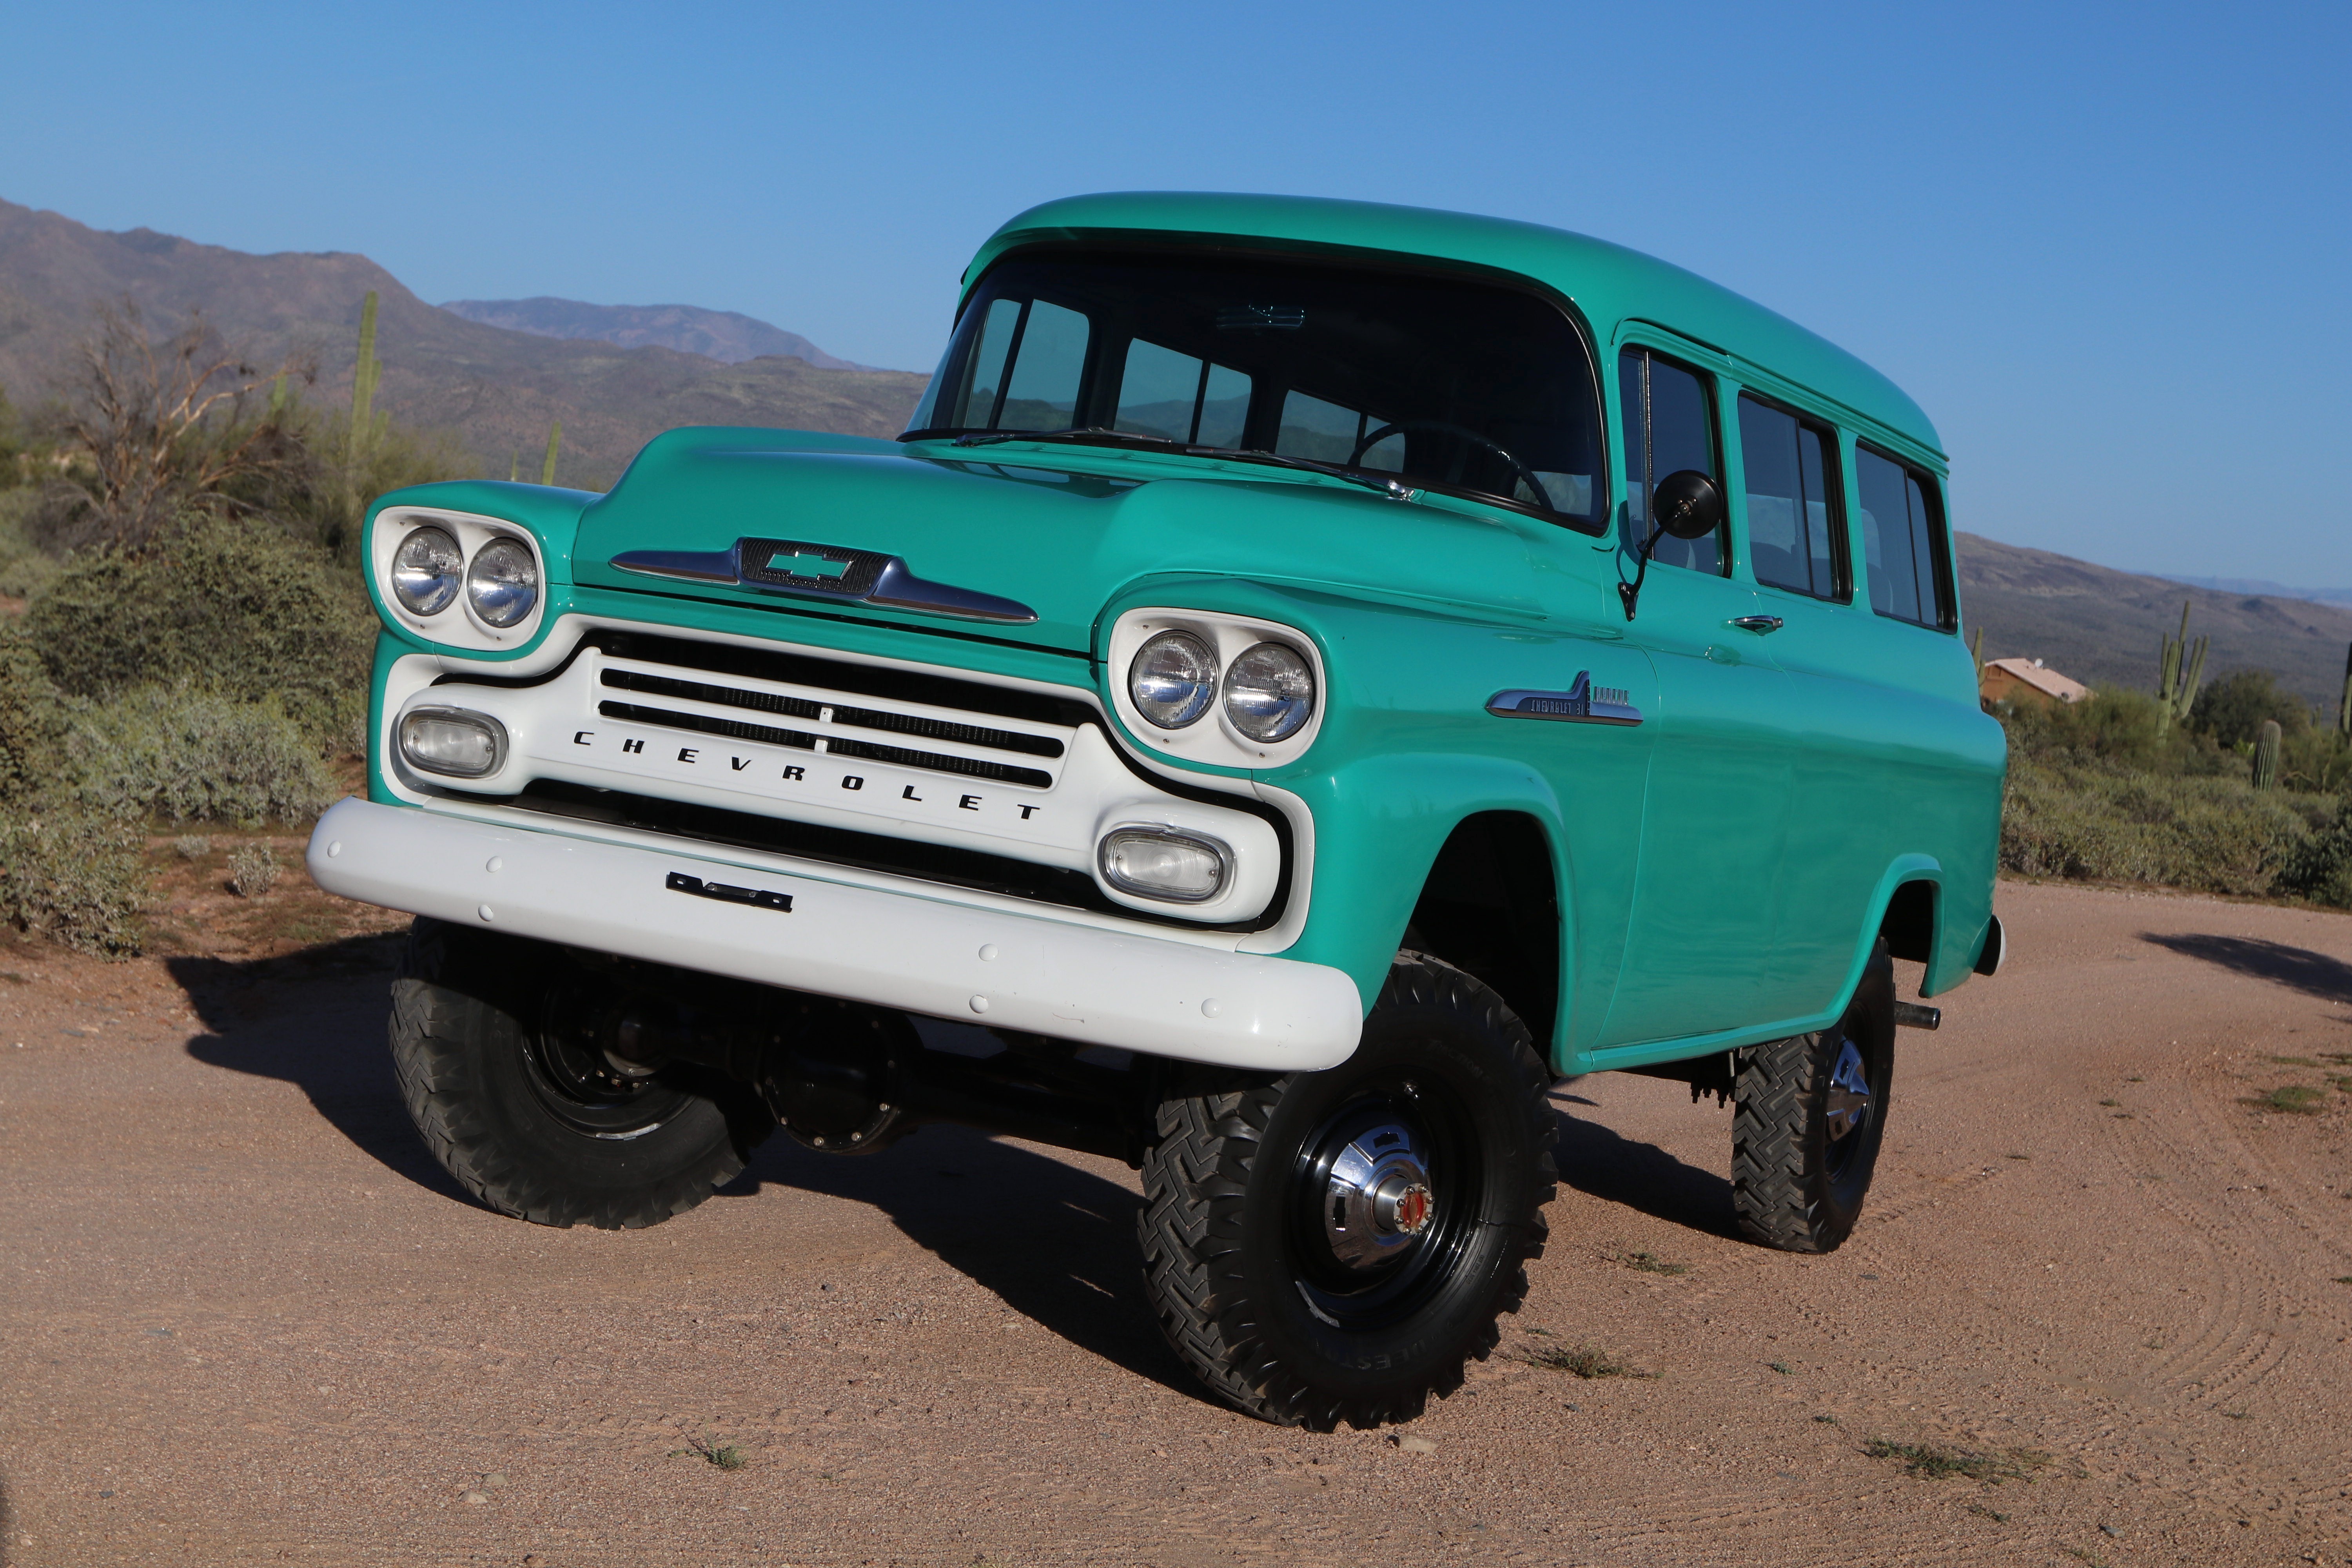 This 1958 Chevrolet Suburban Carryall Was Converted To NAPCO 4x4 Specifications